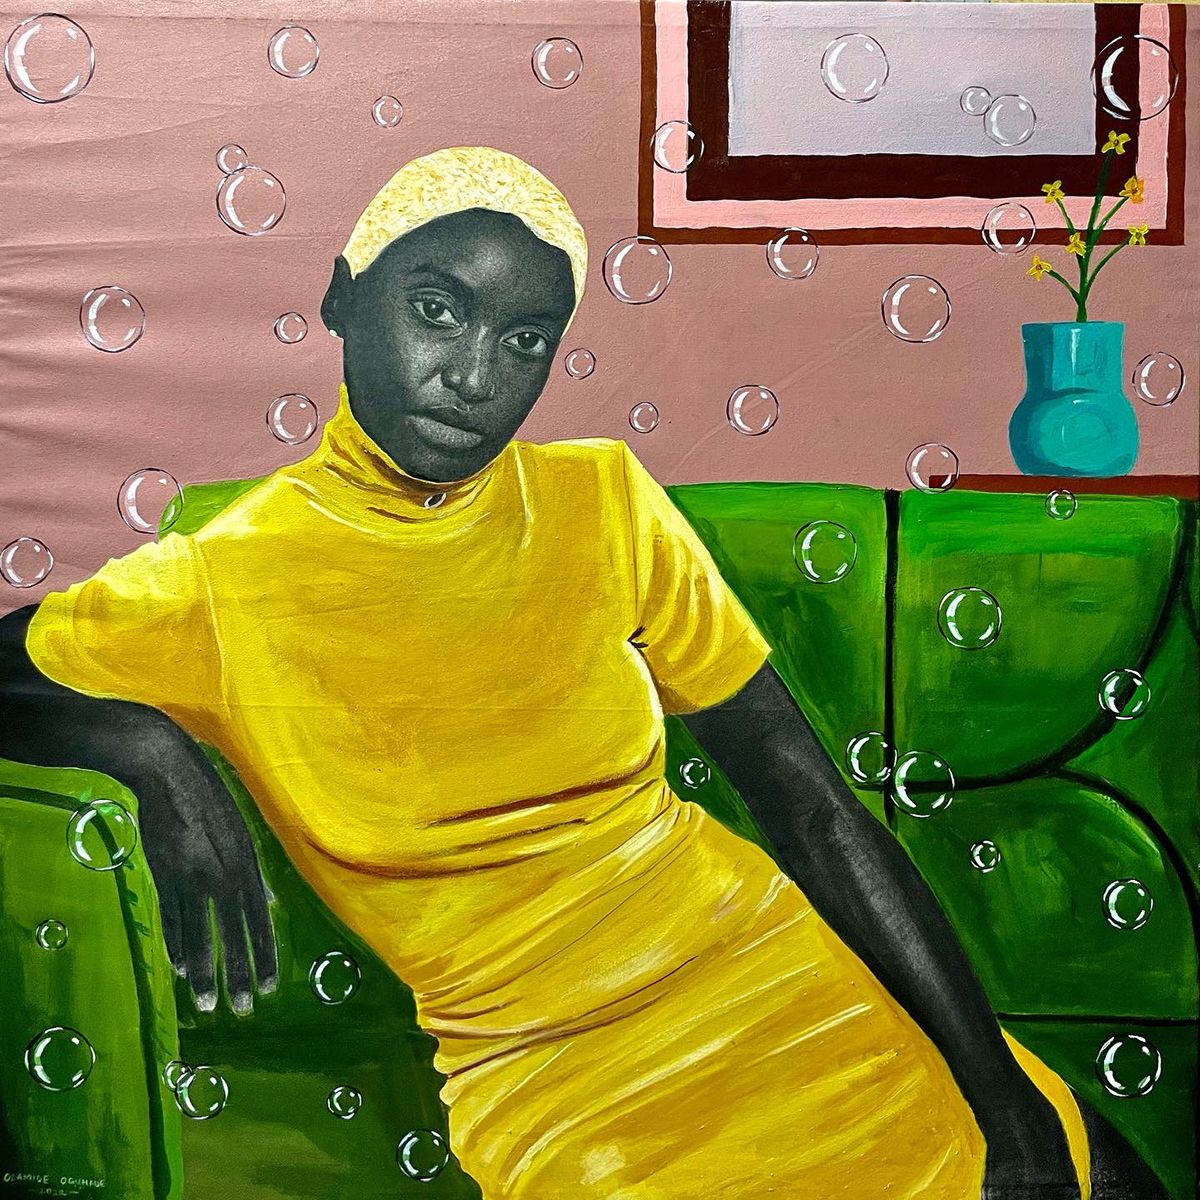 African Society, Figurative Paintings By Olamide Ogunade (4)